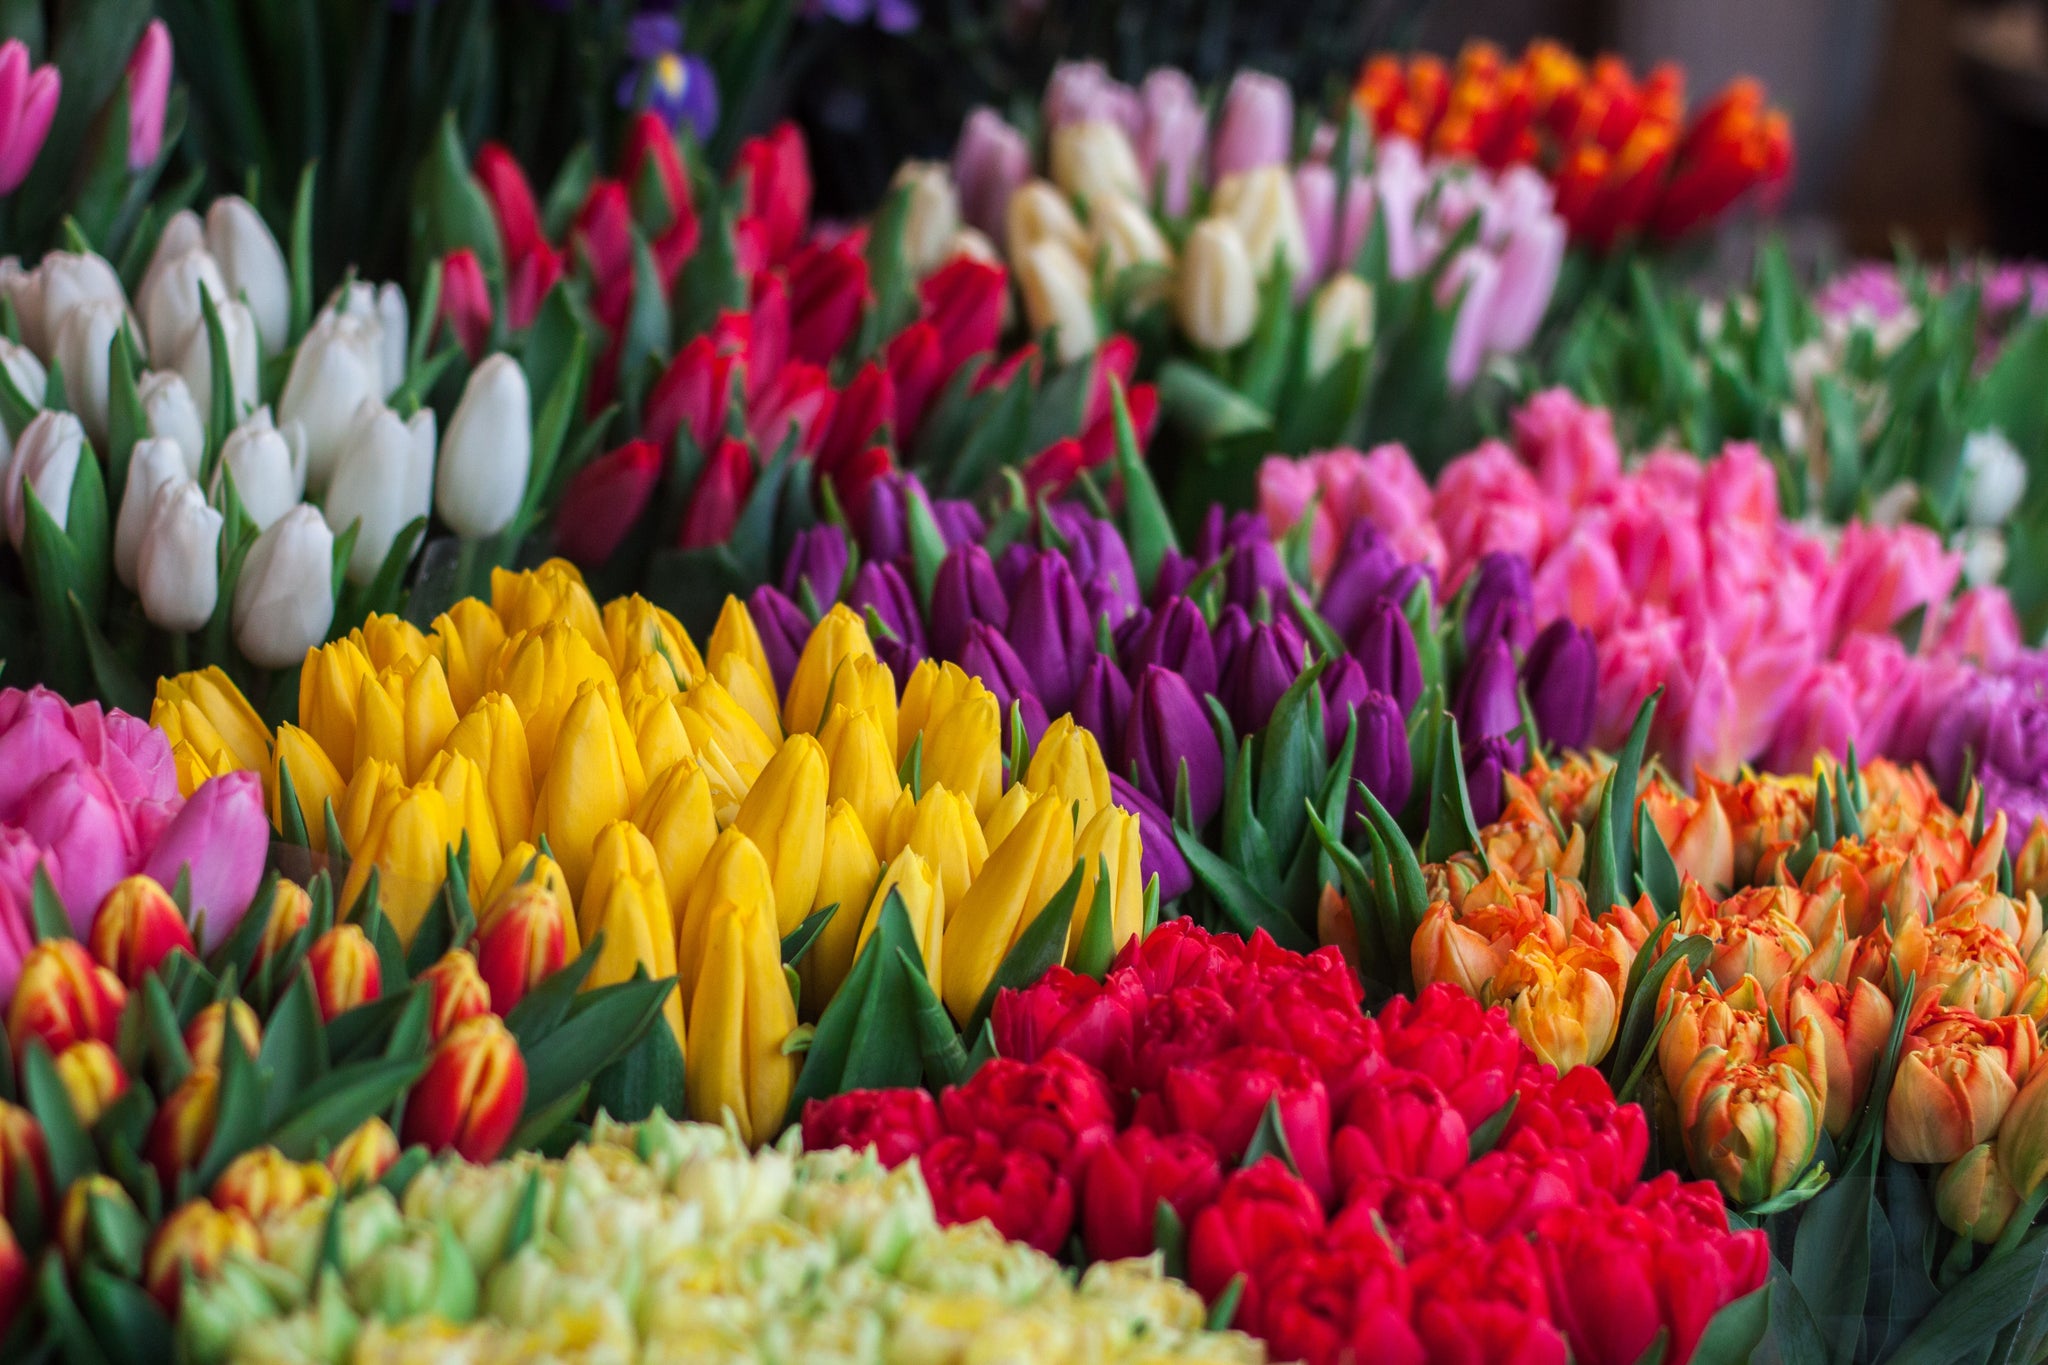 Springtime Flowers in Melbourne: Our Top Picks